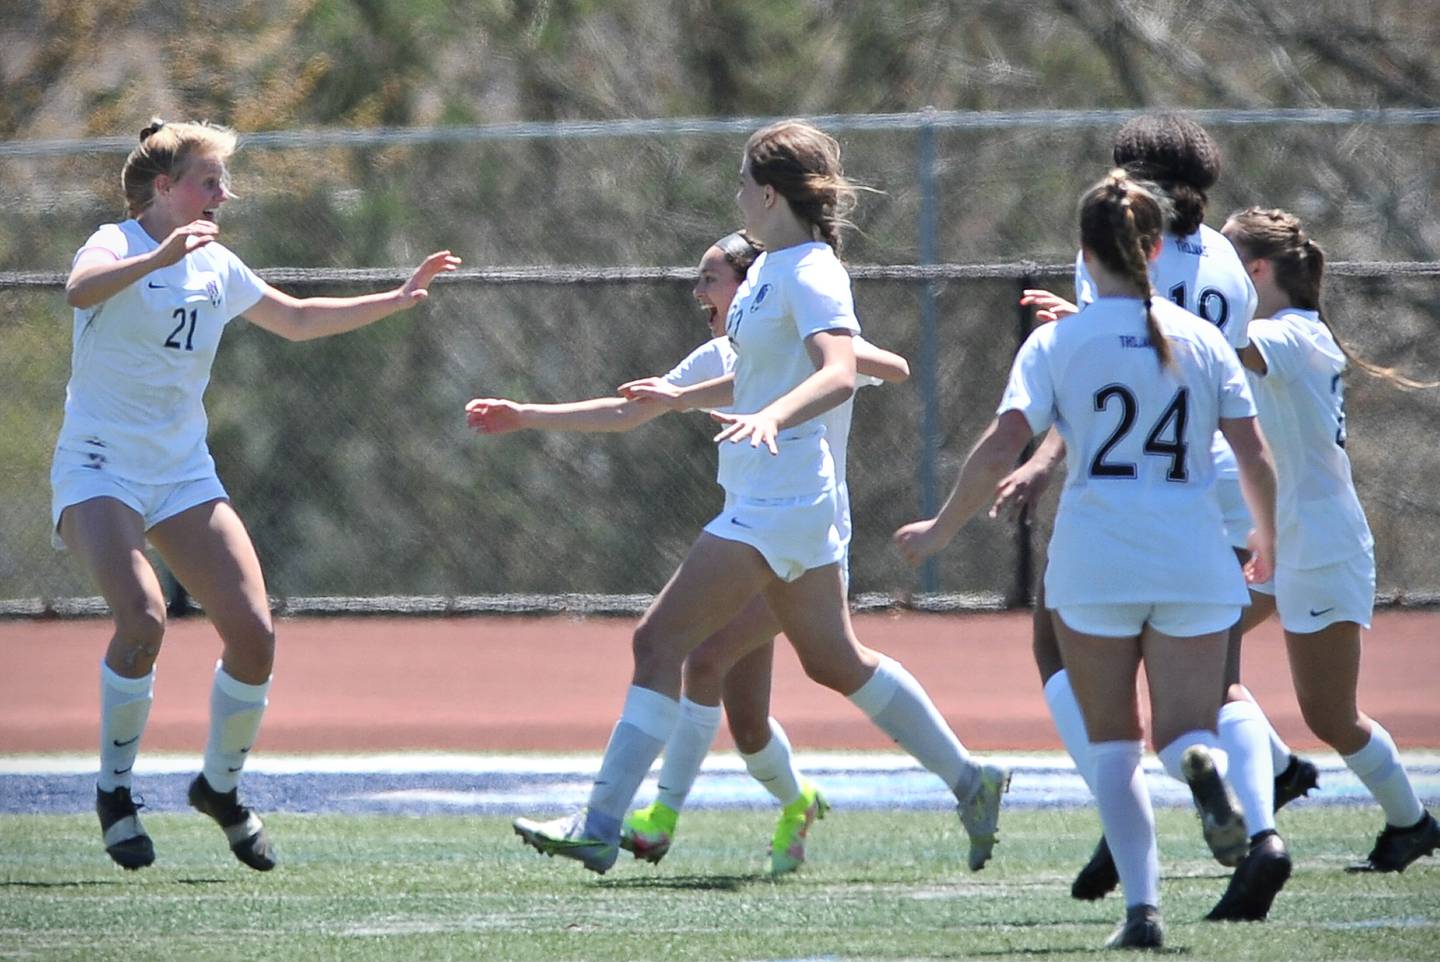 Ryann Wendt (21) is rushed by Downers Grove North teammates after scoring a goal against Downers Grove South during a game on May. 7, 2022 at Downers Grove South High School.